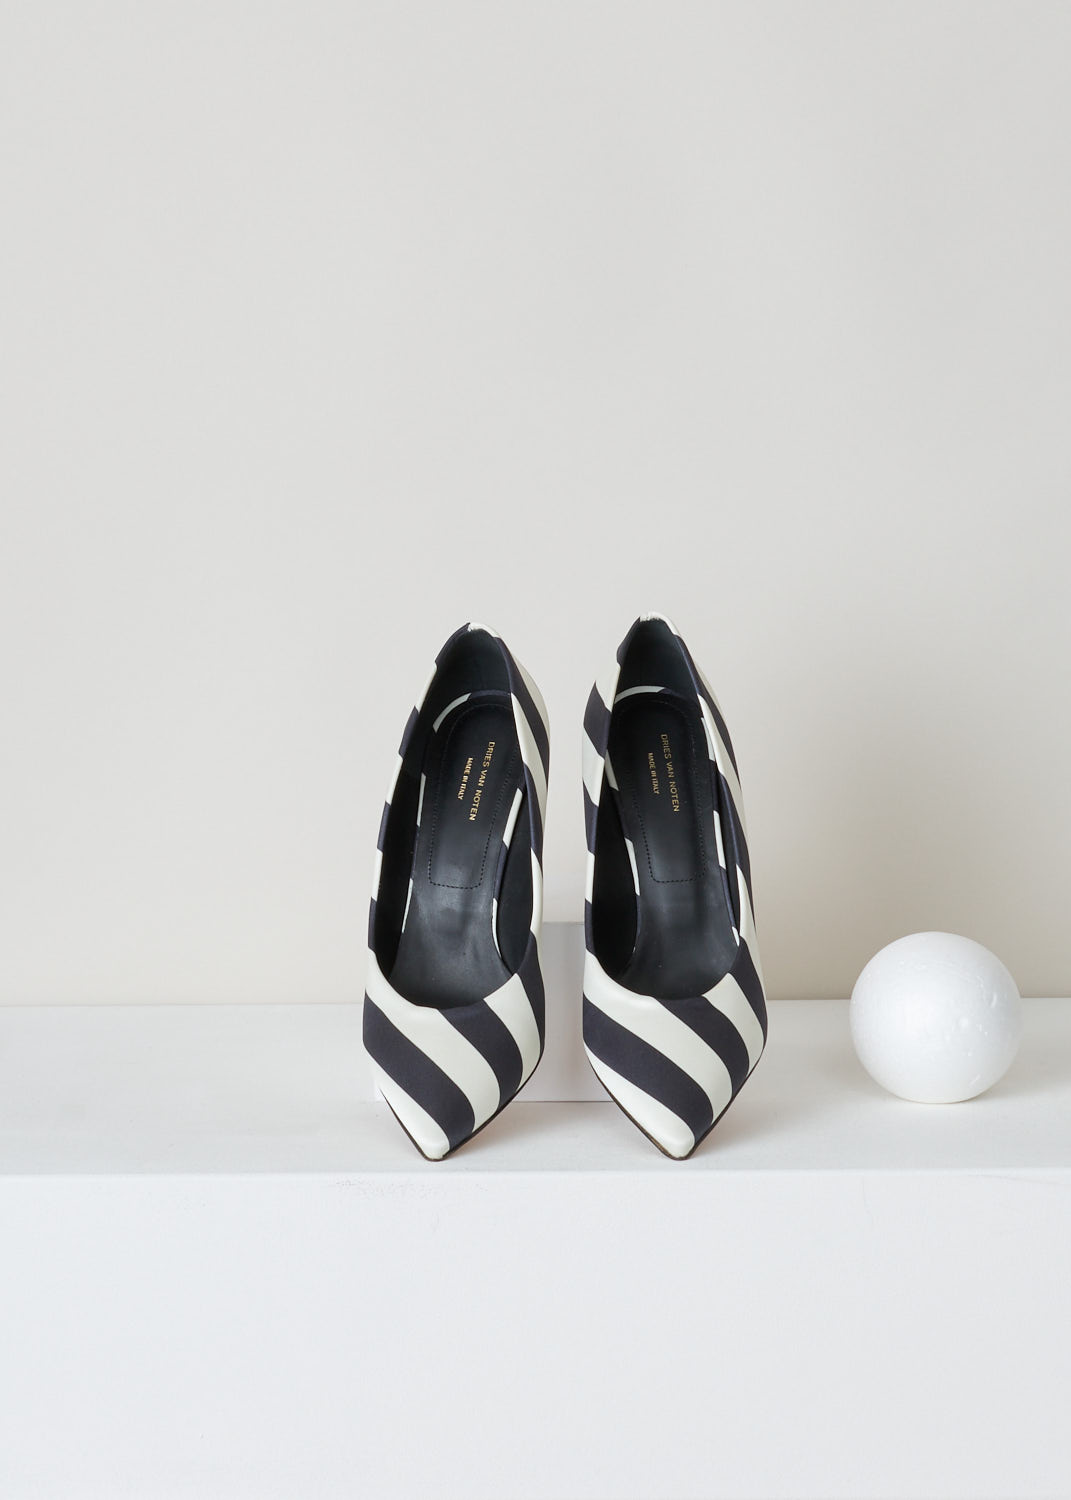 Dries van Noten, Black and white striped pumps, WS25_153_80_QU160_black900, black white, top,  Black and white colored pump, featuring a tapered heel and pointed toe. 

Heel height: 8 cm / 3.14 inch. 